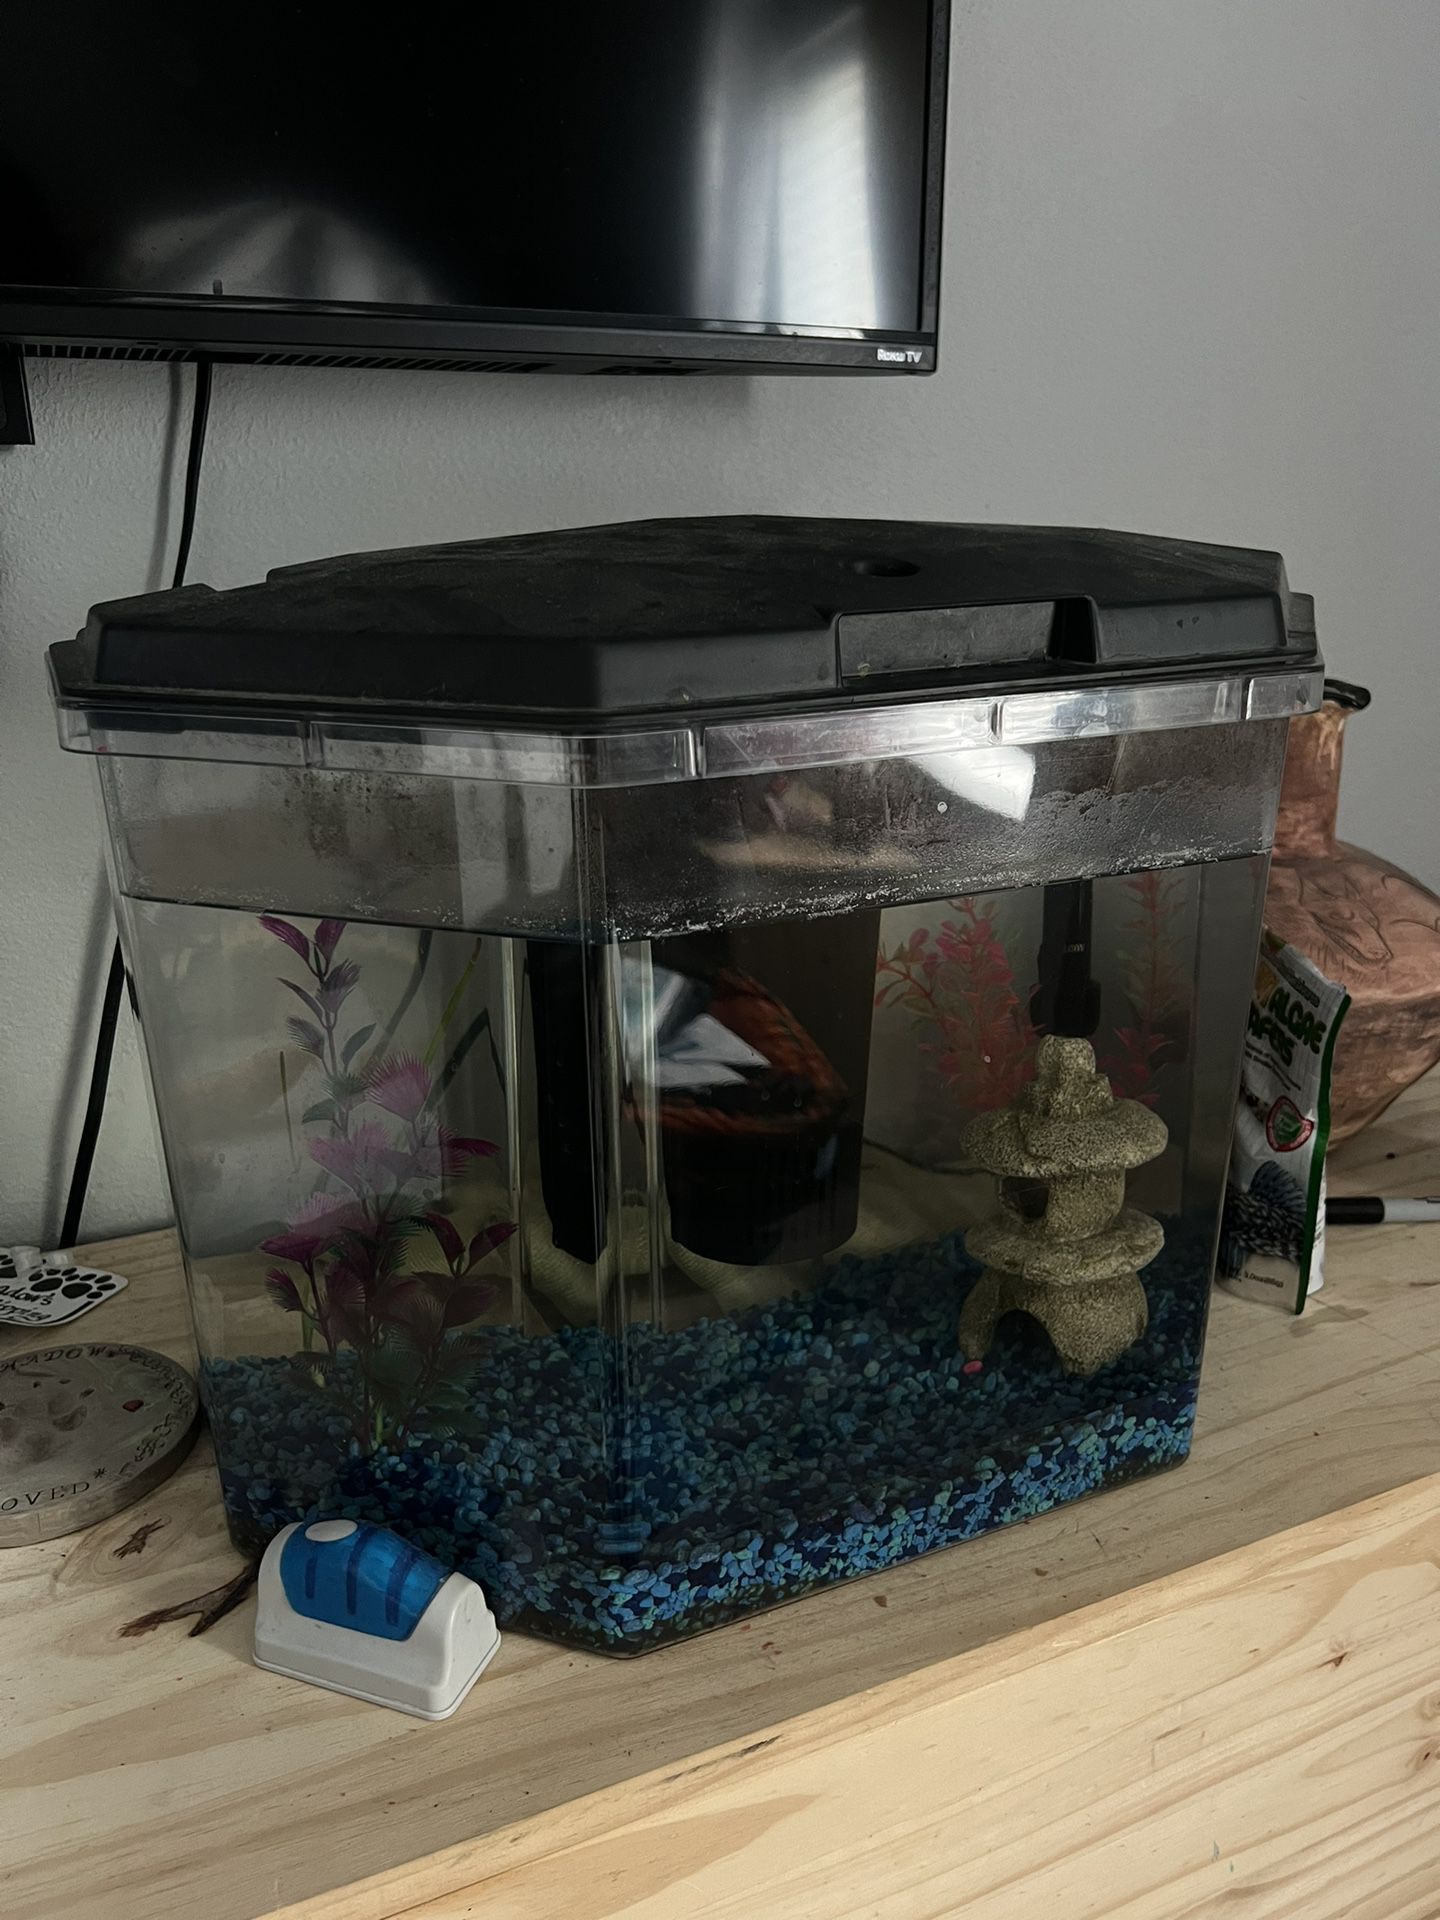 Tank for sale